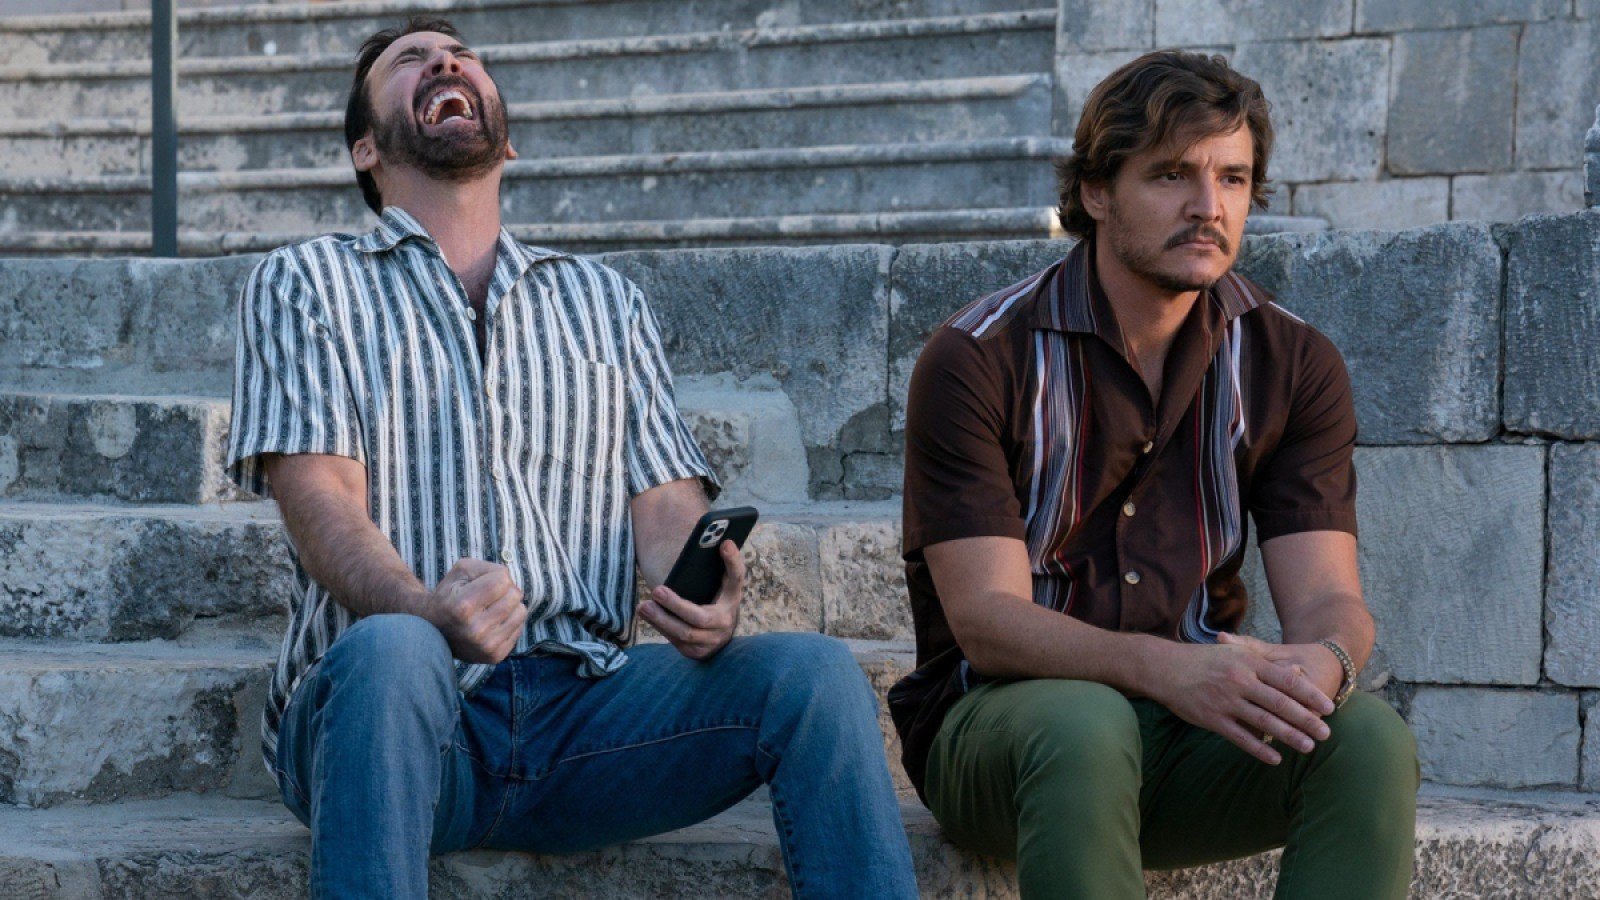 Nic Cage and Pedro Pascal in the Unbearable Weight of Massive Talent